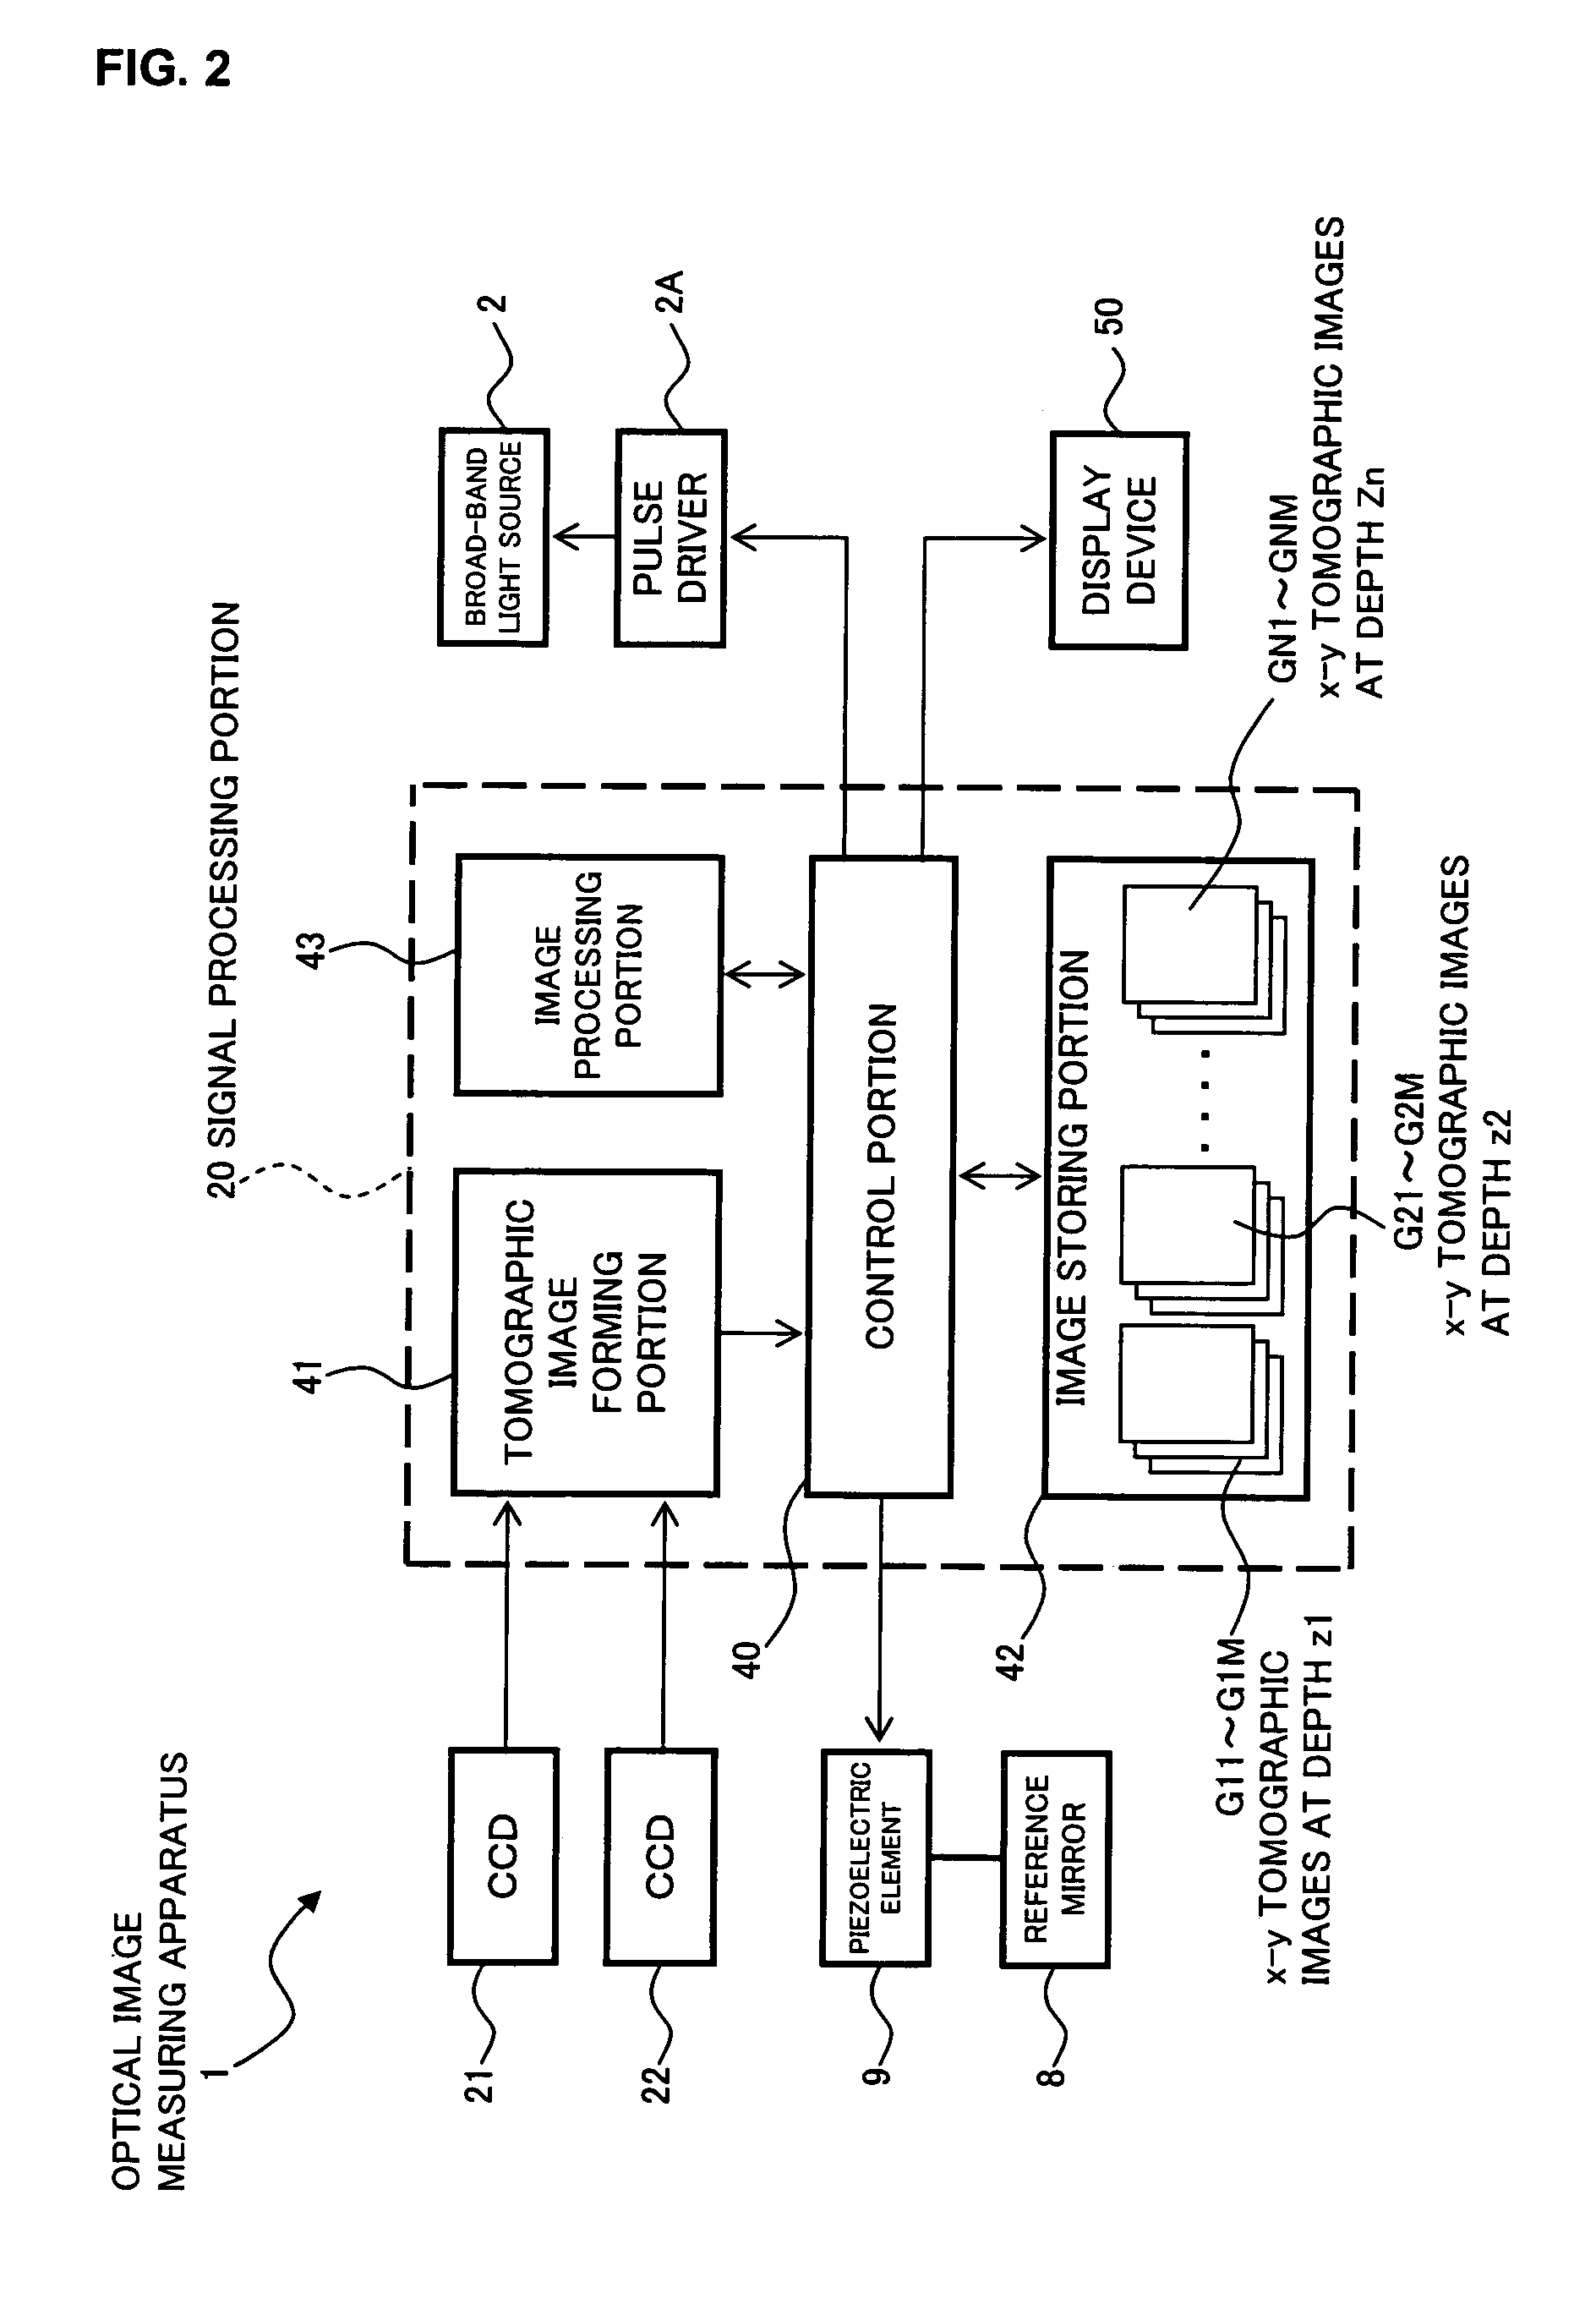 Optical image measuring apparatus and optical image measuring method for forming a velocity distribution image expressing a moving velocity distribution of the moving matter